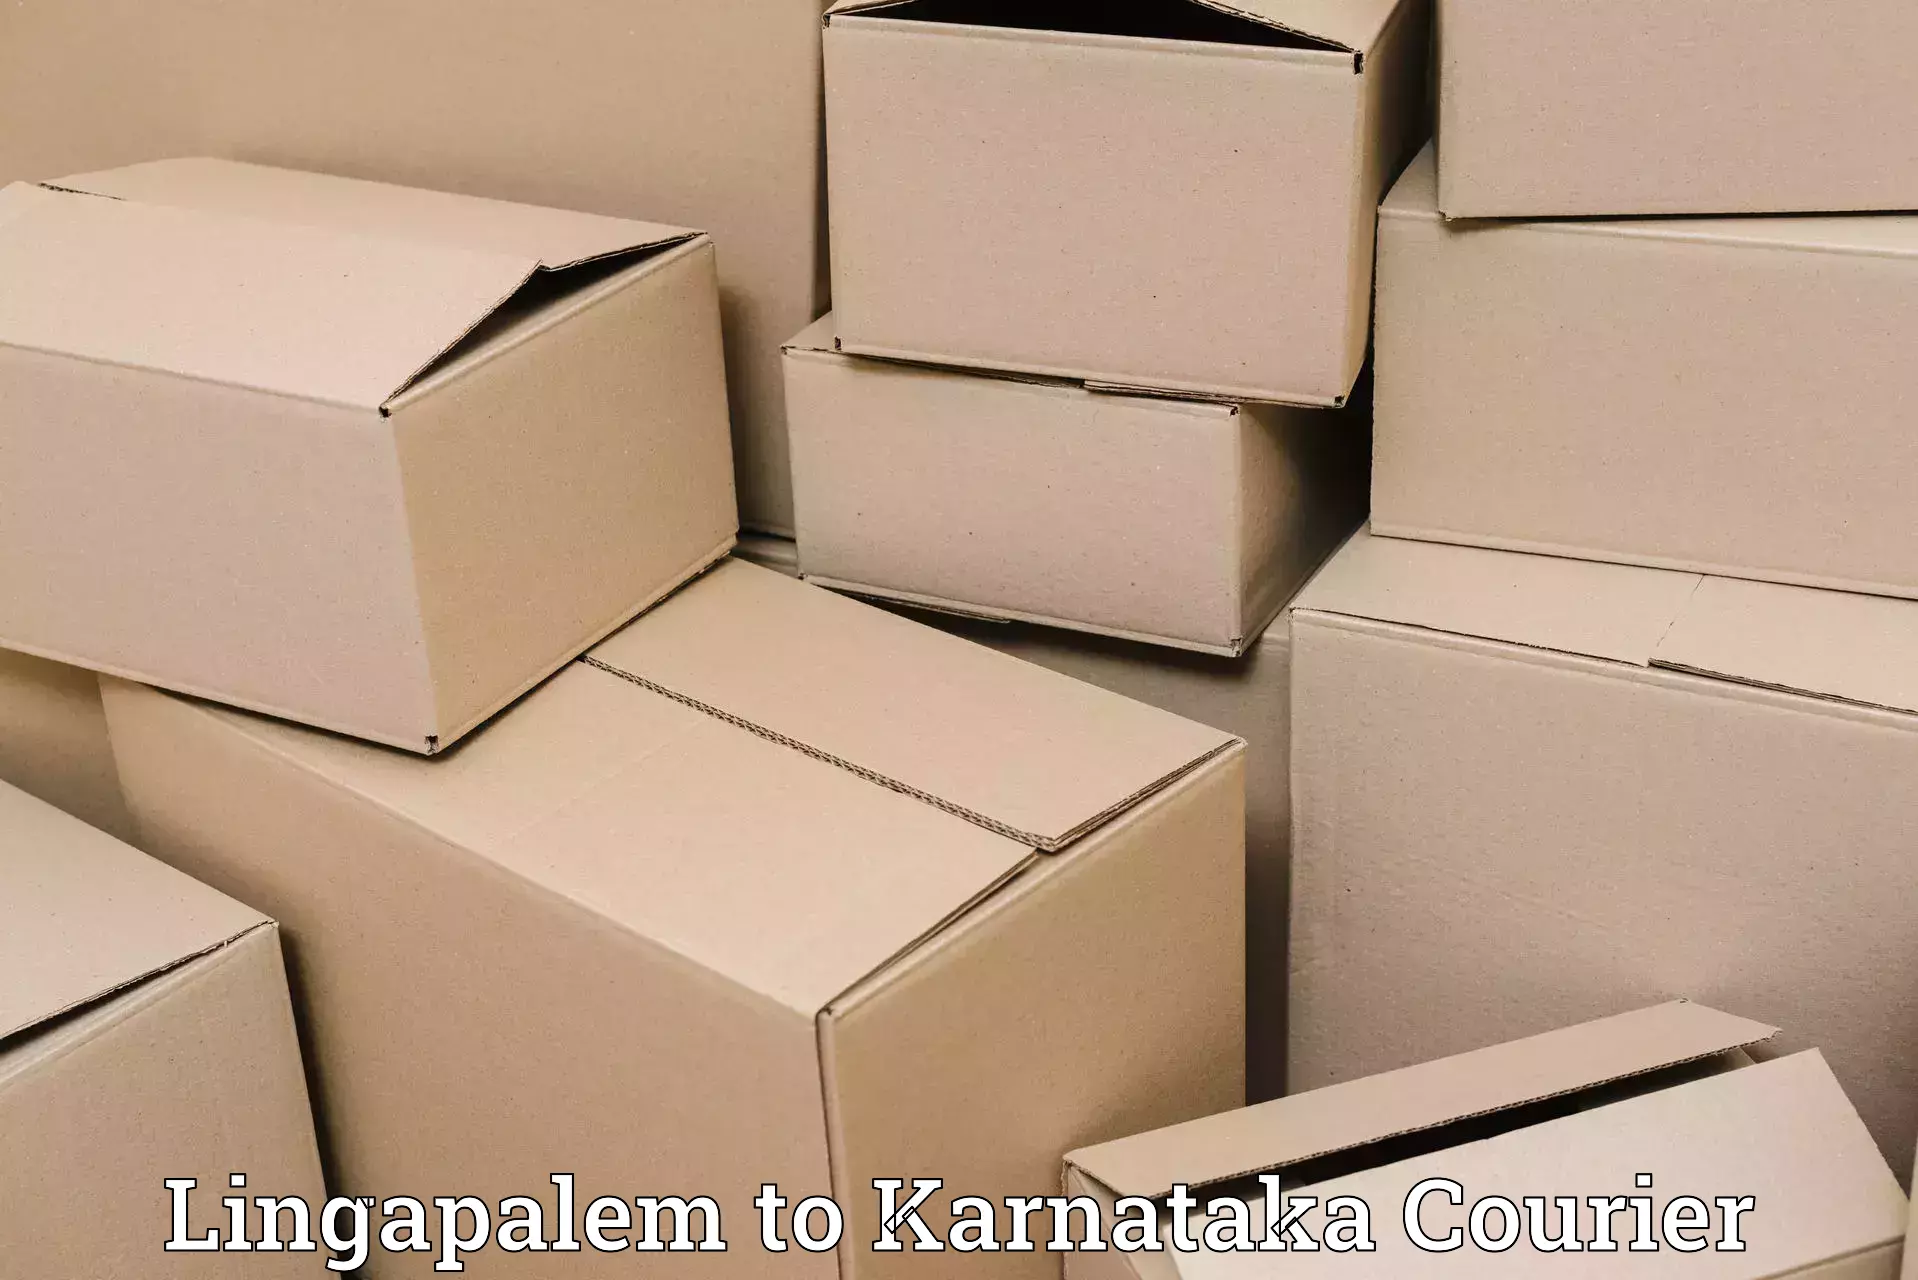 Next day courier in Lingapalem to Mangalore Port